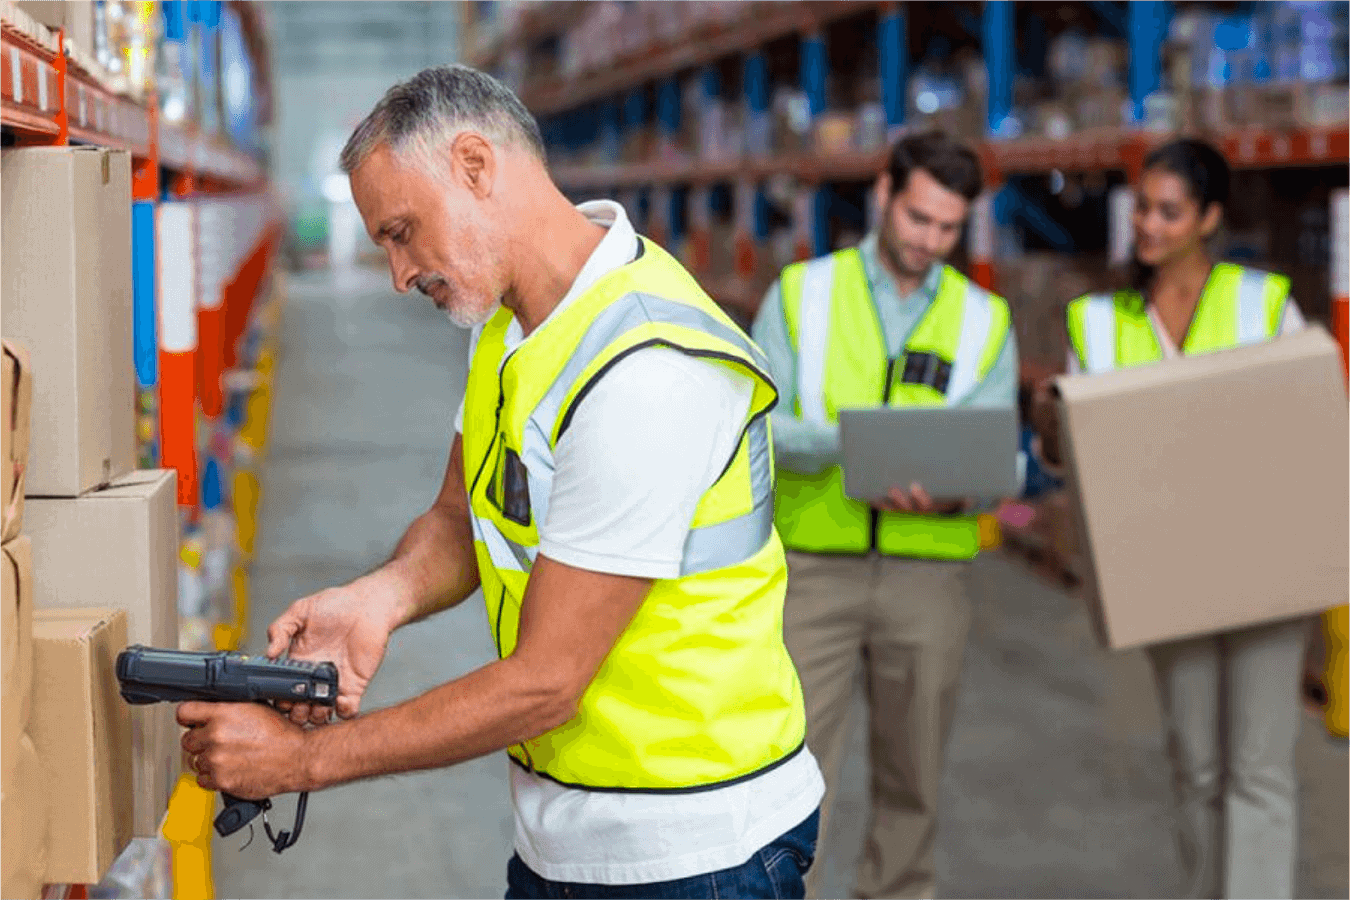 A Reliable Scanner Keeps Your Warehouse on Track